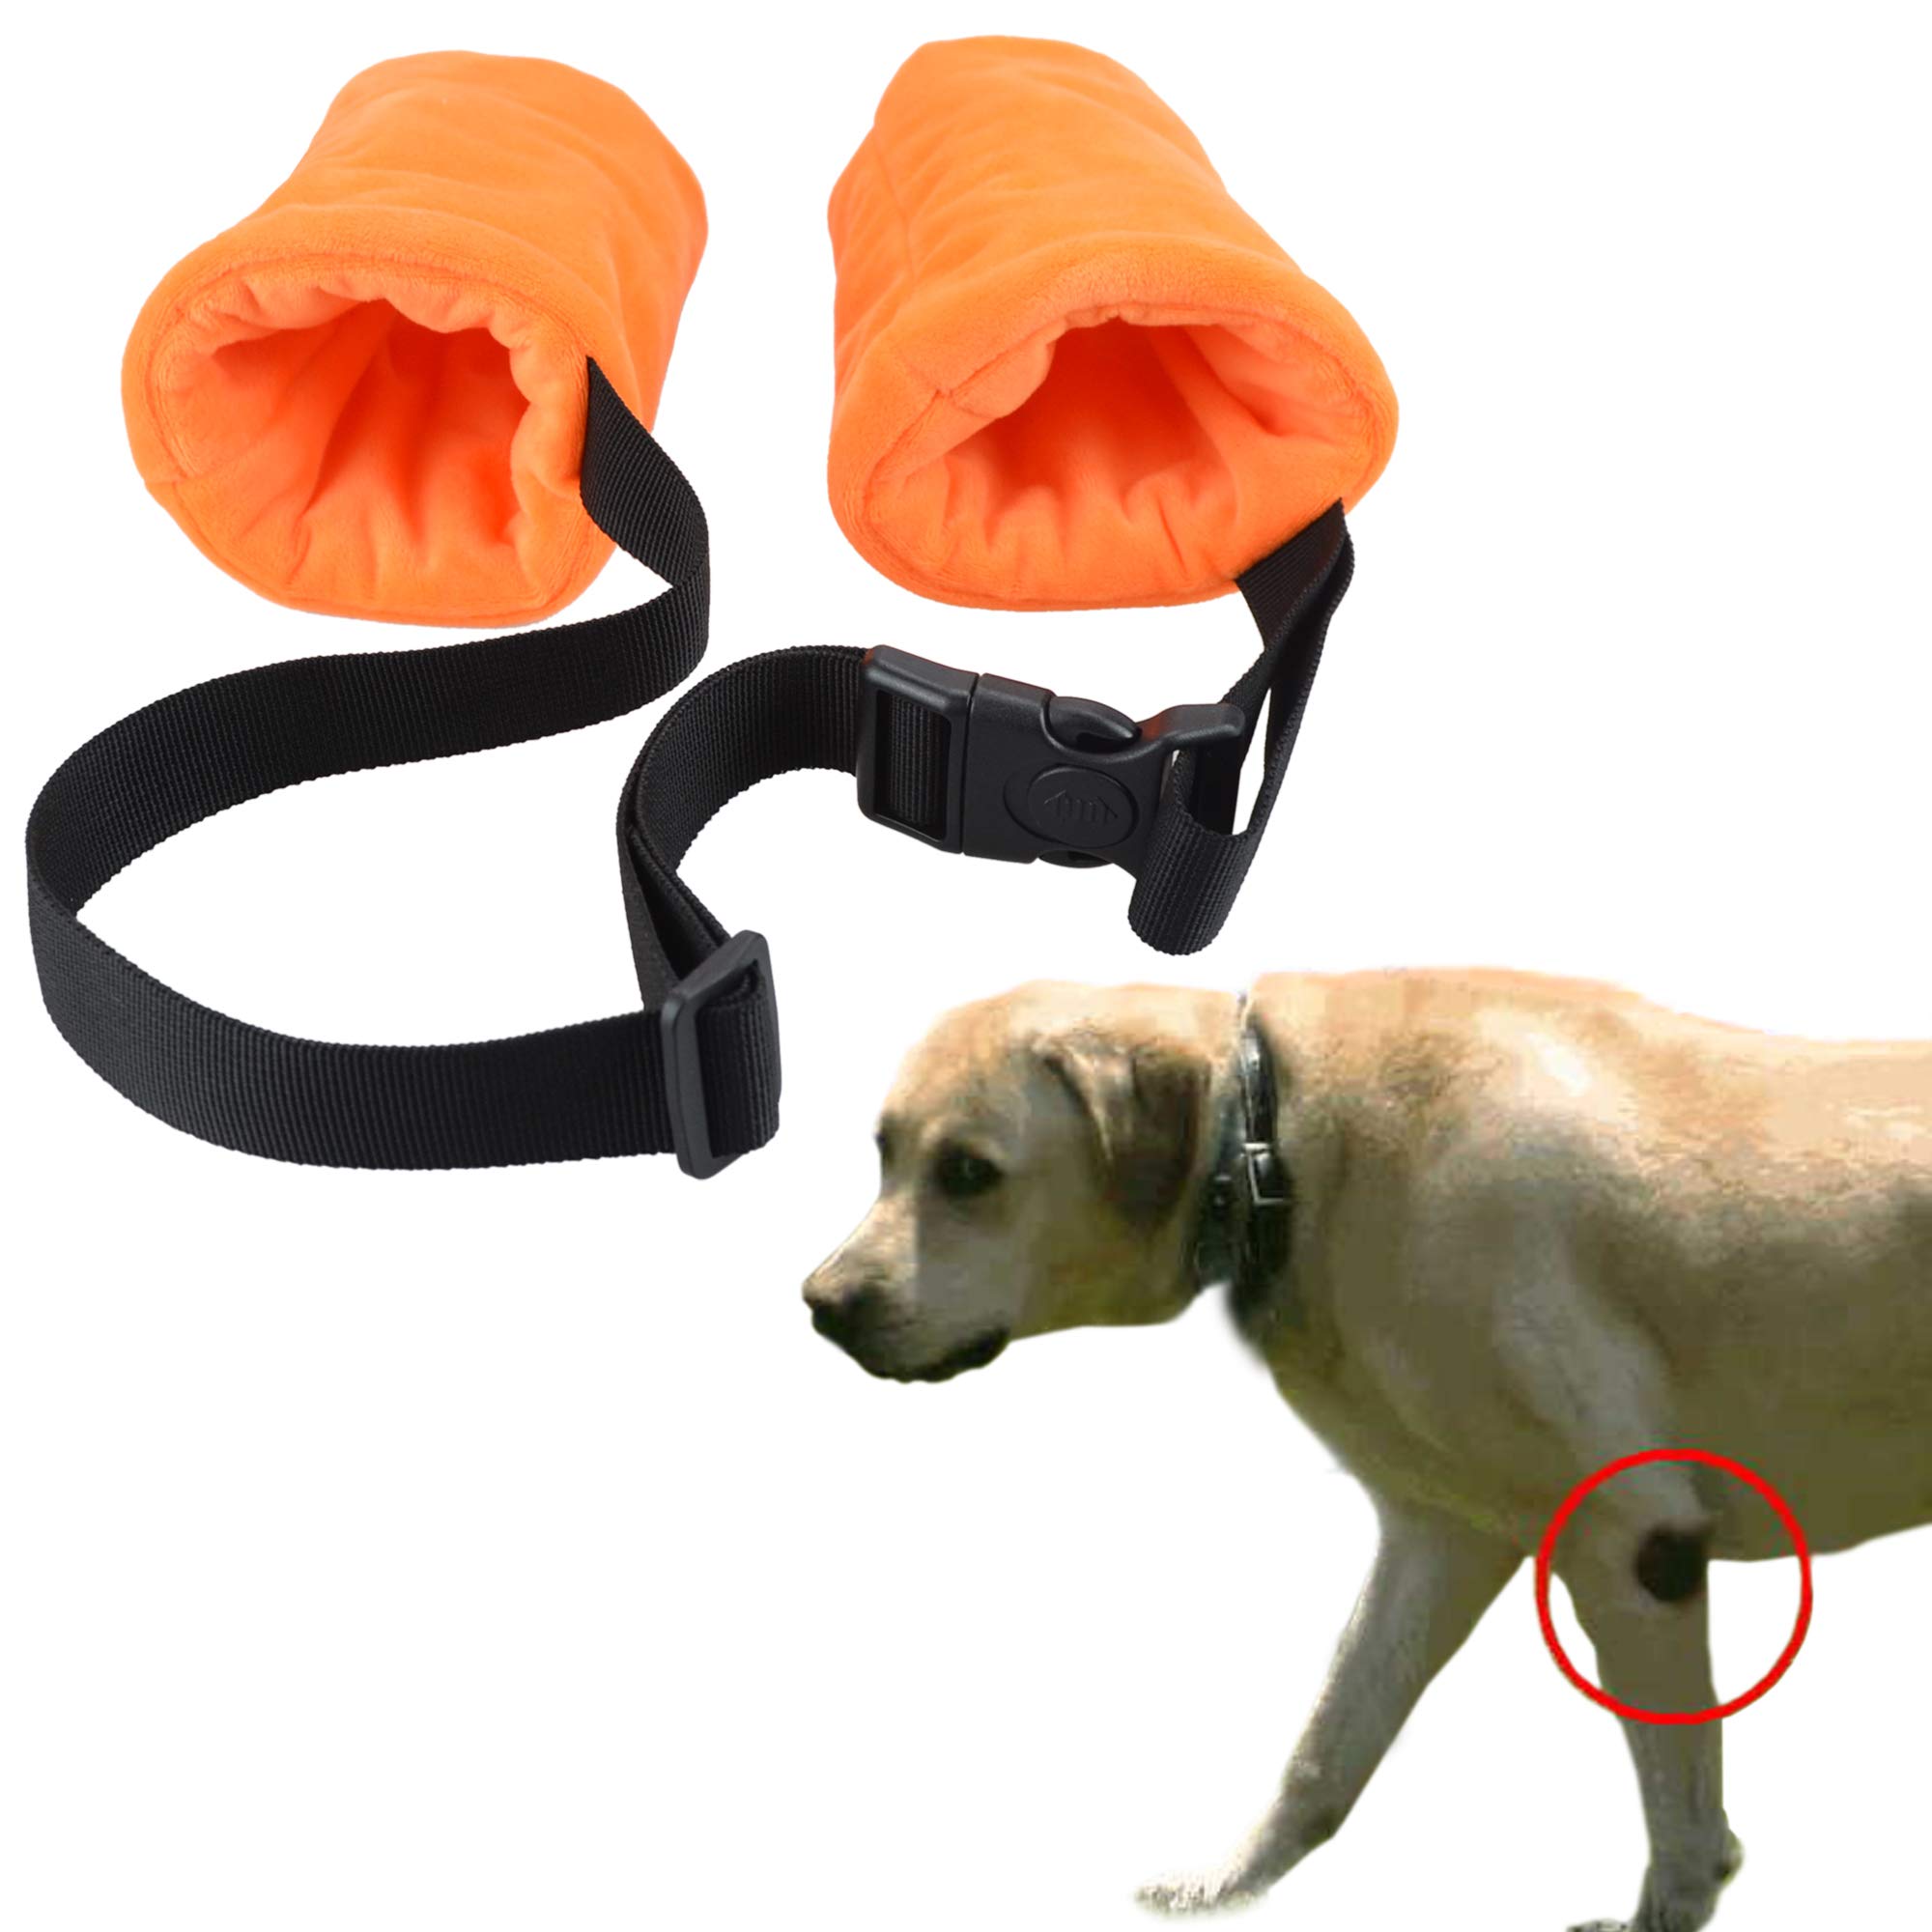 YUYUSO Dog Elbow Protector Fleece Elbow Sleeves with cotton Pad for Dogs Prevent Injury (Small)